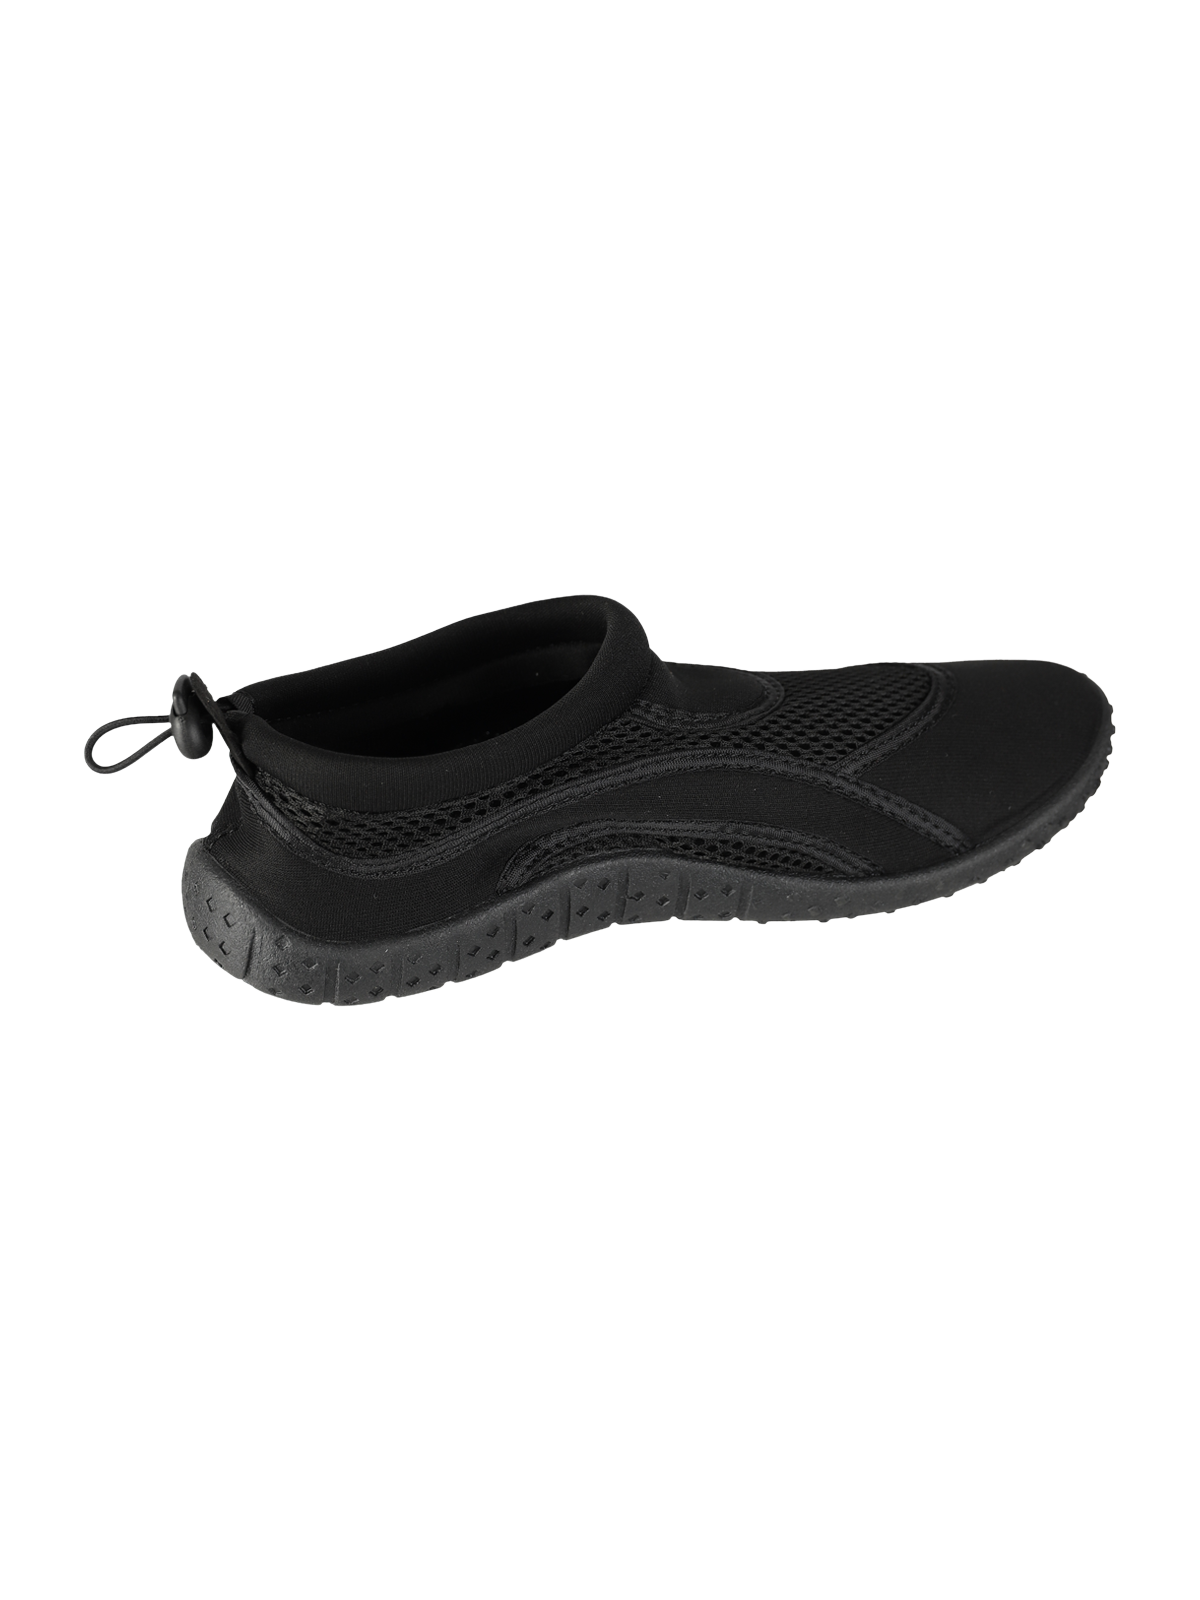 Paddle Water Shoes | Black